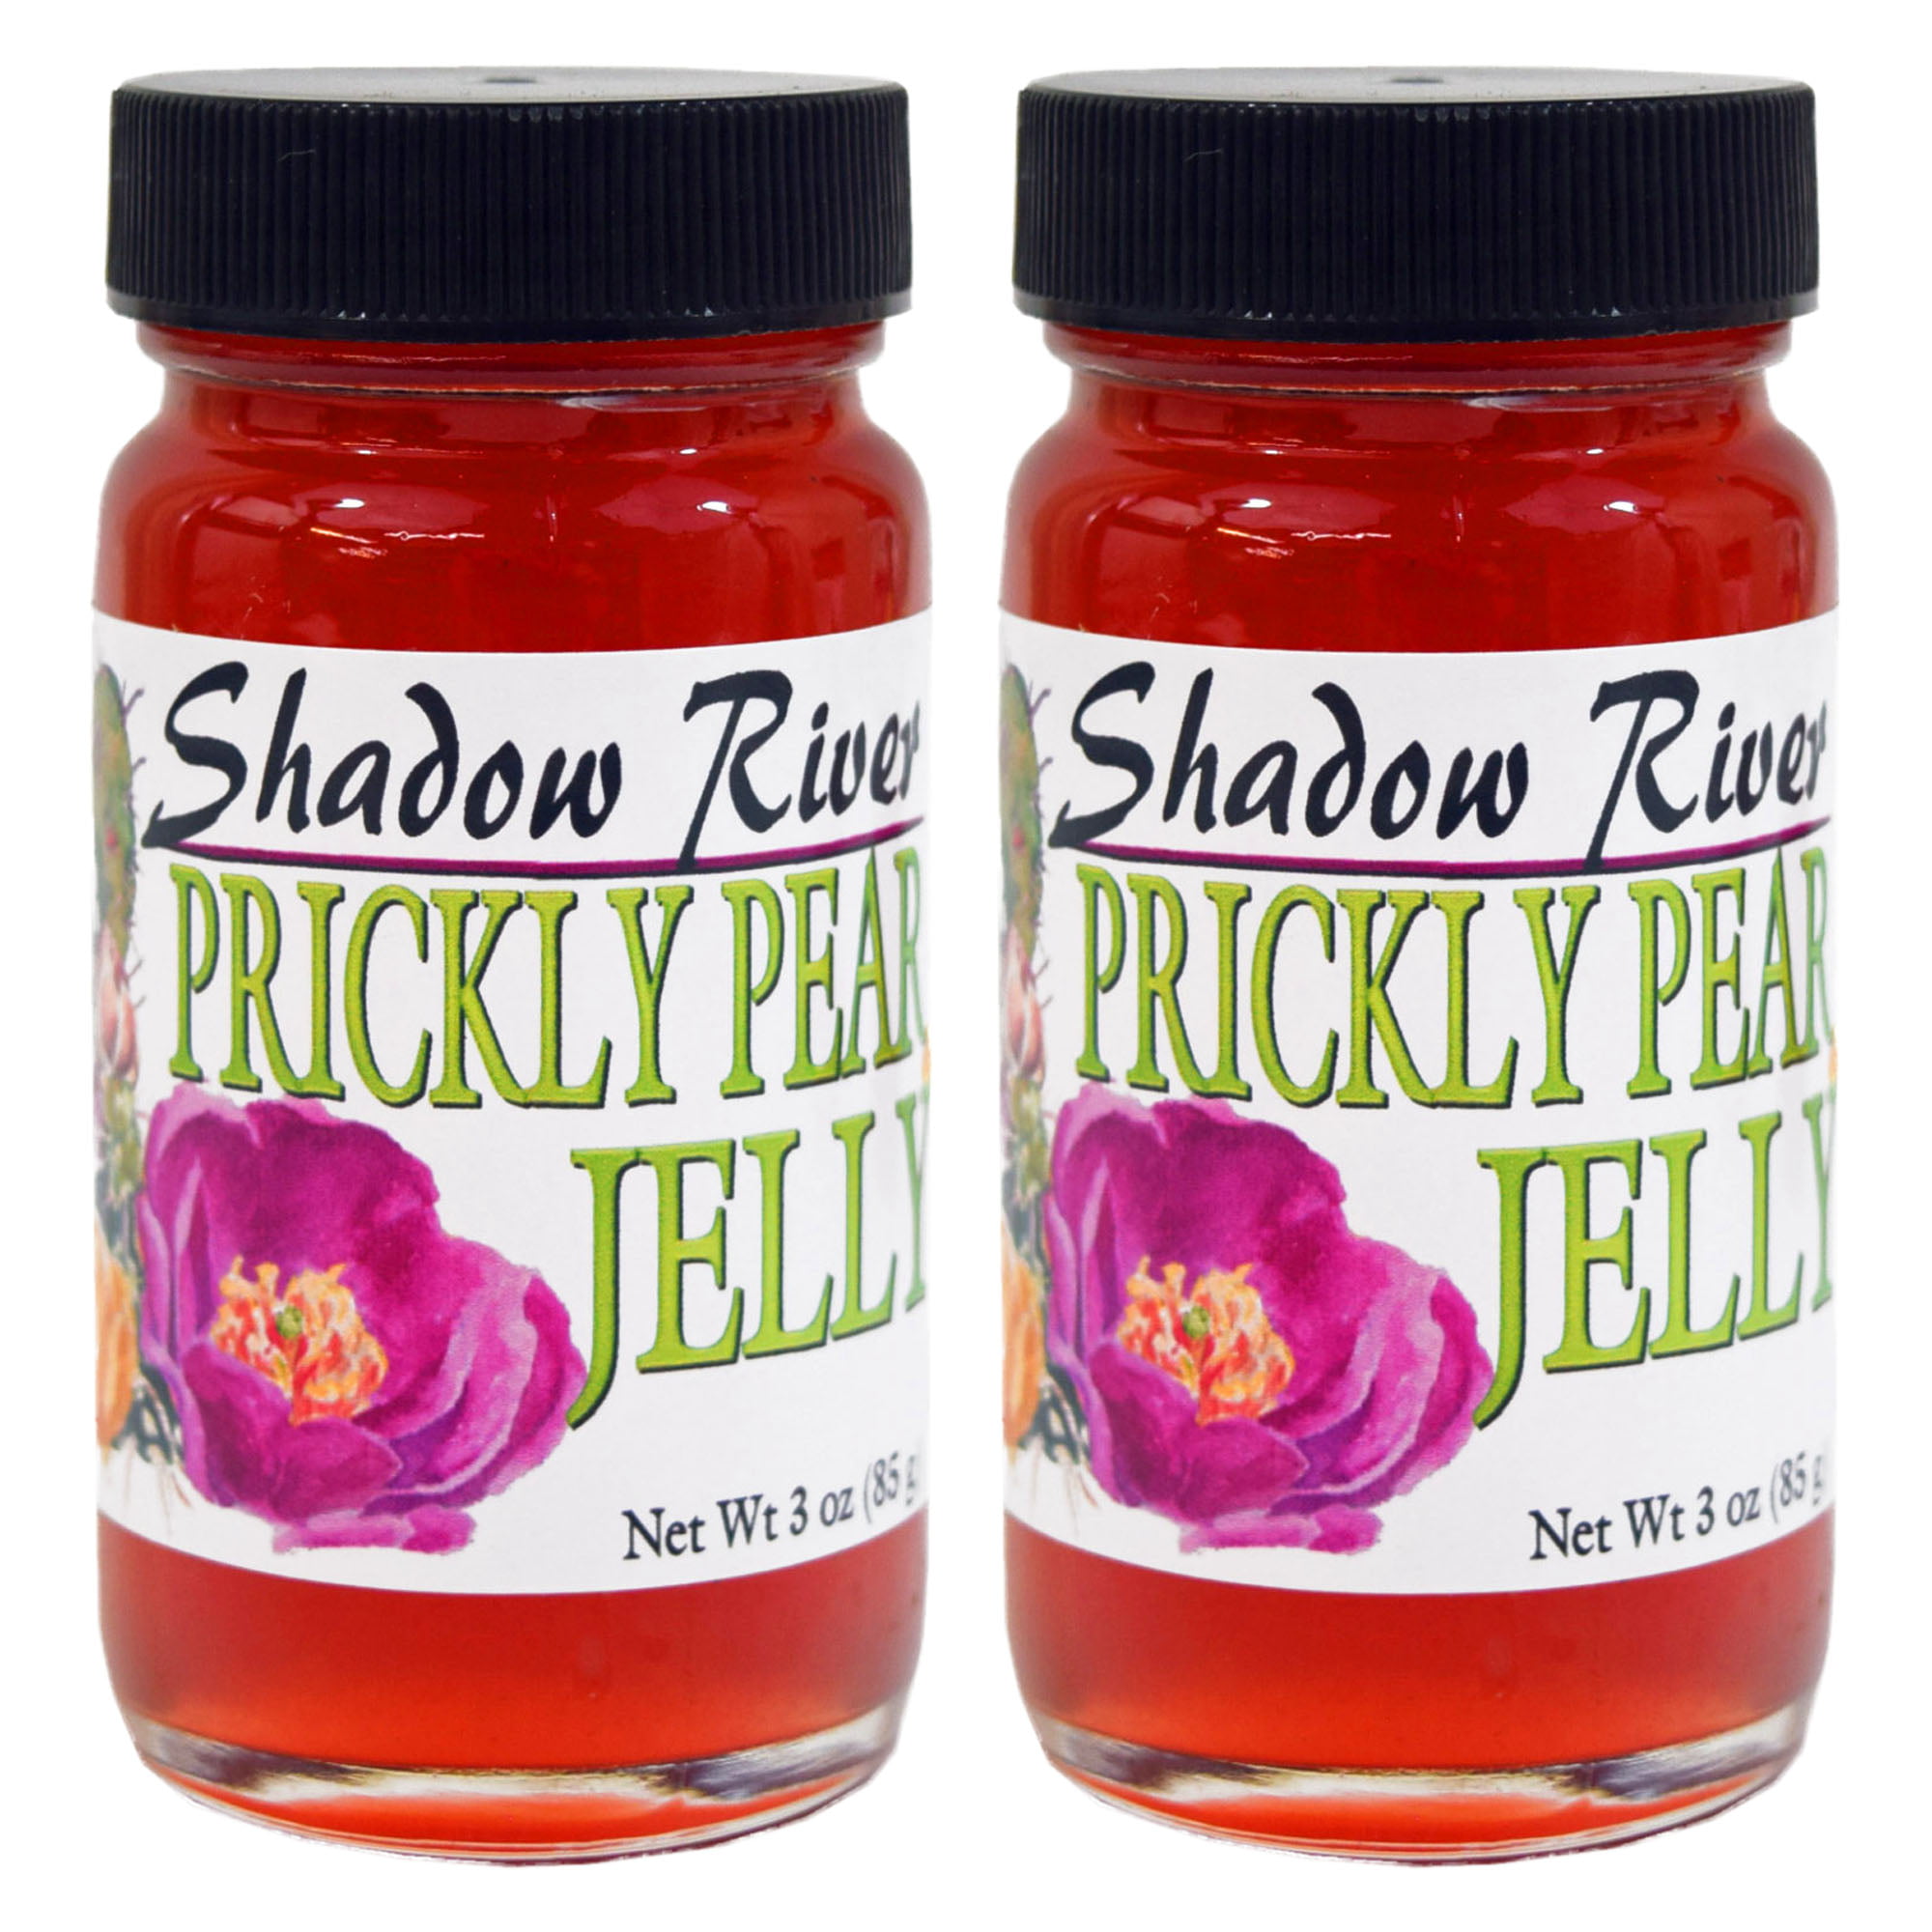 Shadow River Gourmet Prickly Pear Cactus Jelly Made From Real Cactus Fruit Juice 3 Oz Jar Pack Of 2 Walmart Com Walmart Com,Baby Blanket Crochet Pattern For Boys